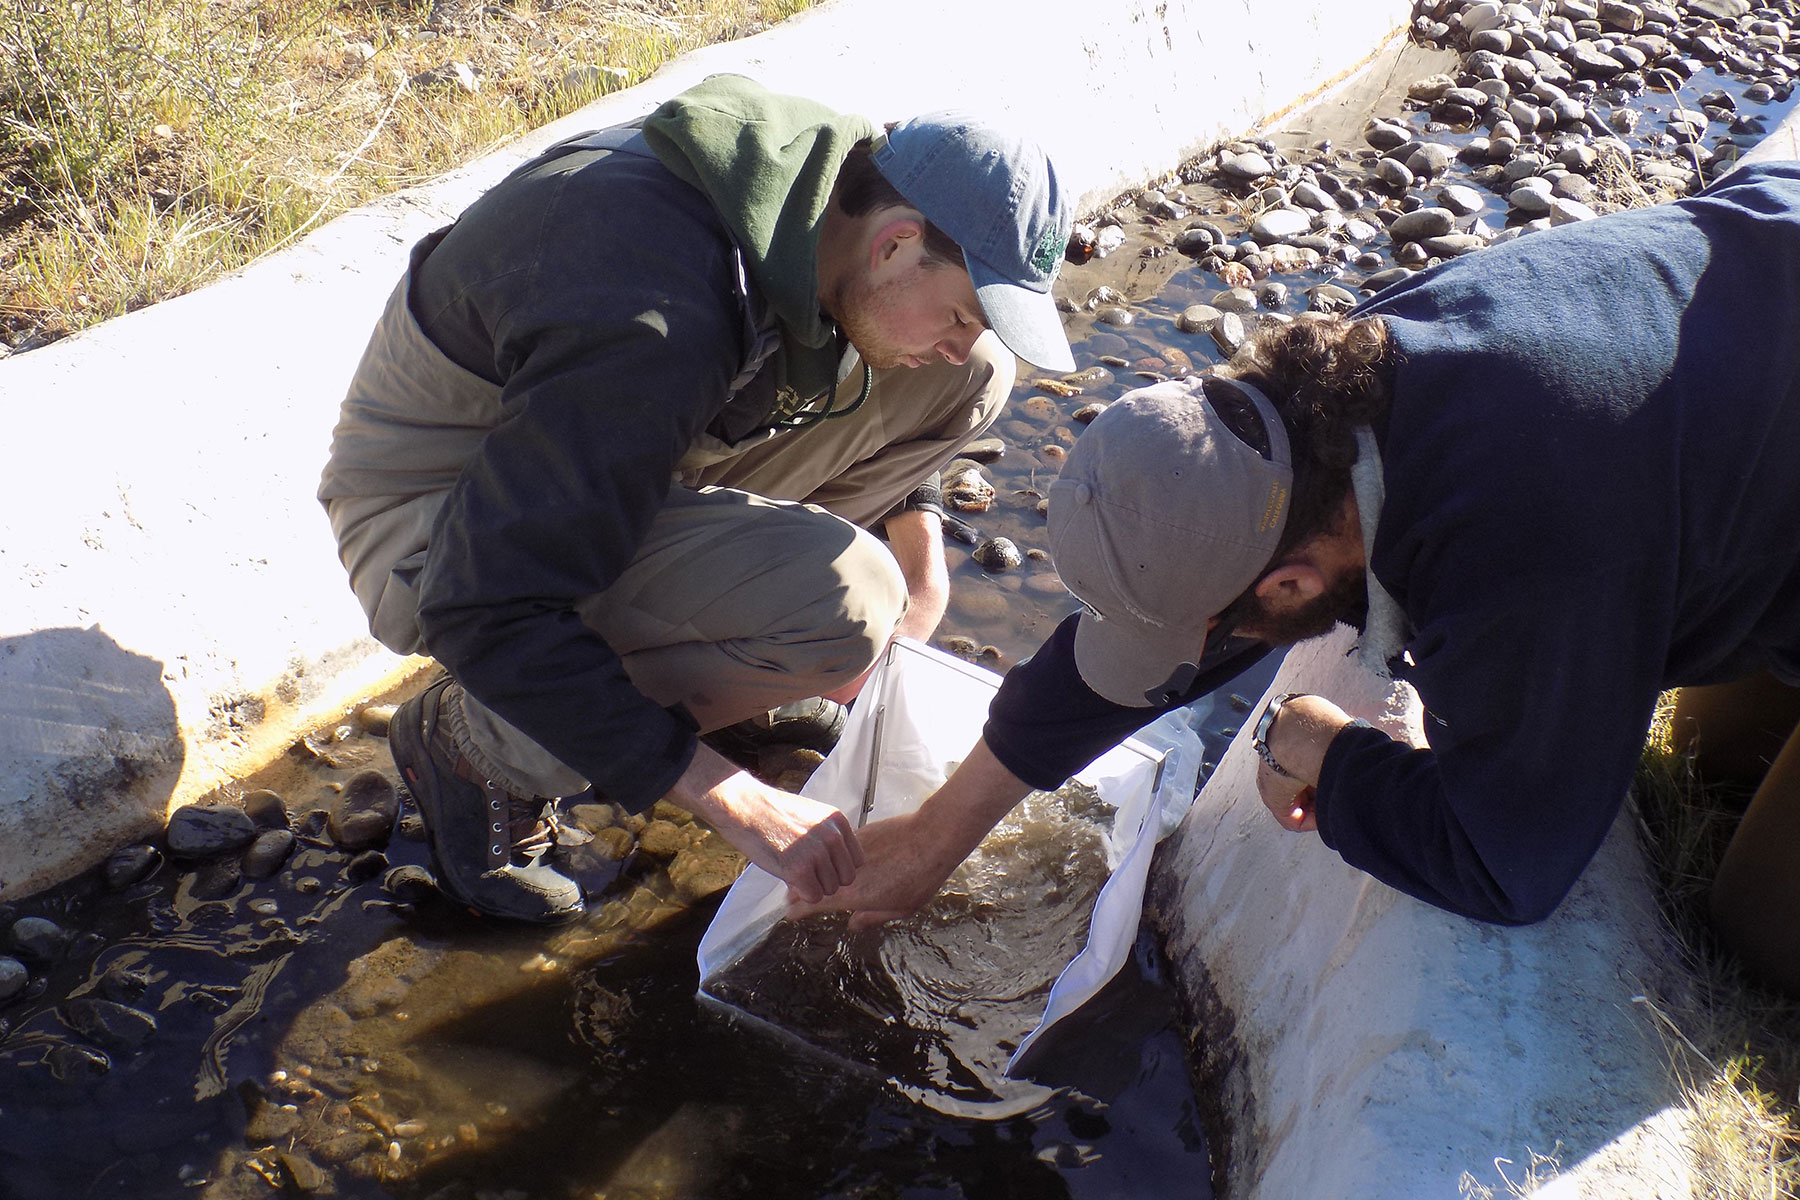 Two individuals lean over a concrete-lined stream bed. One is reaching out to pick something out of a white mesh net.